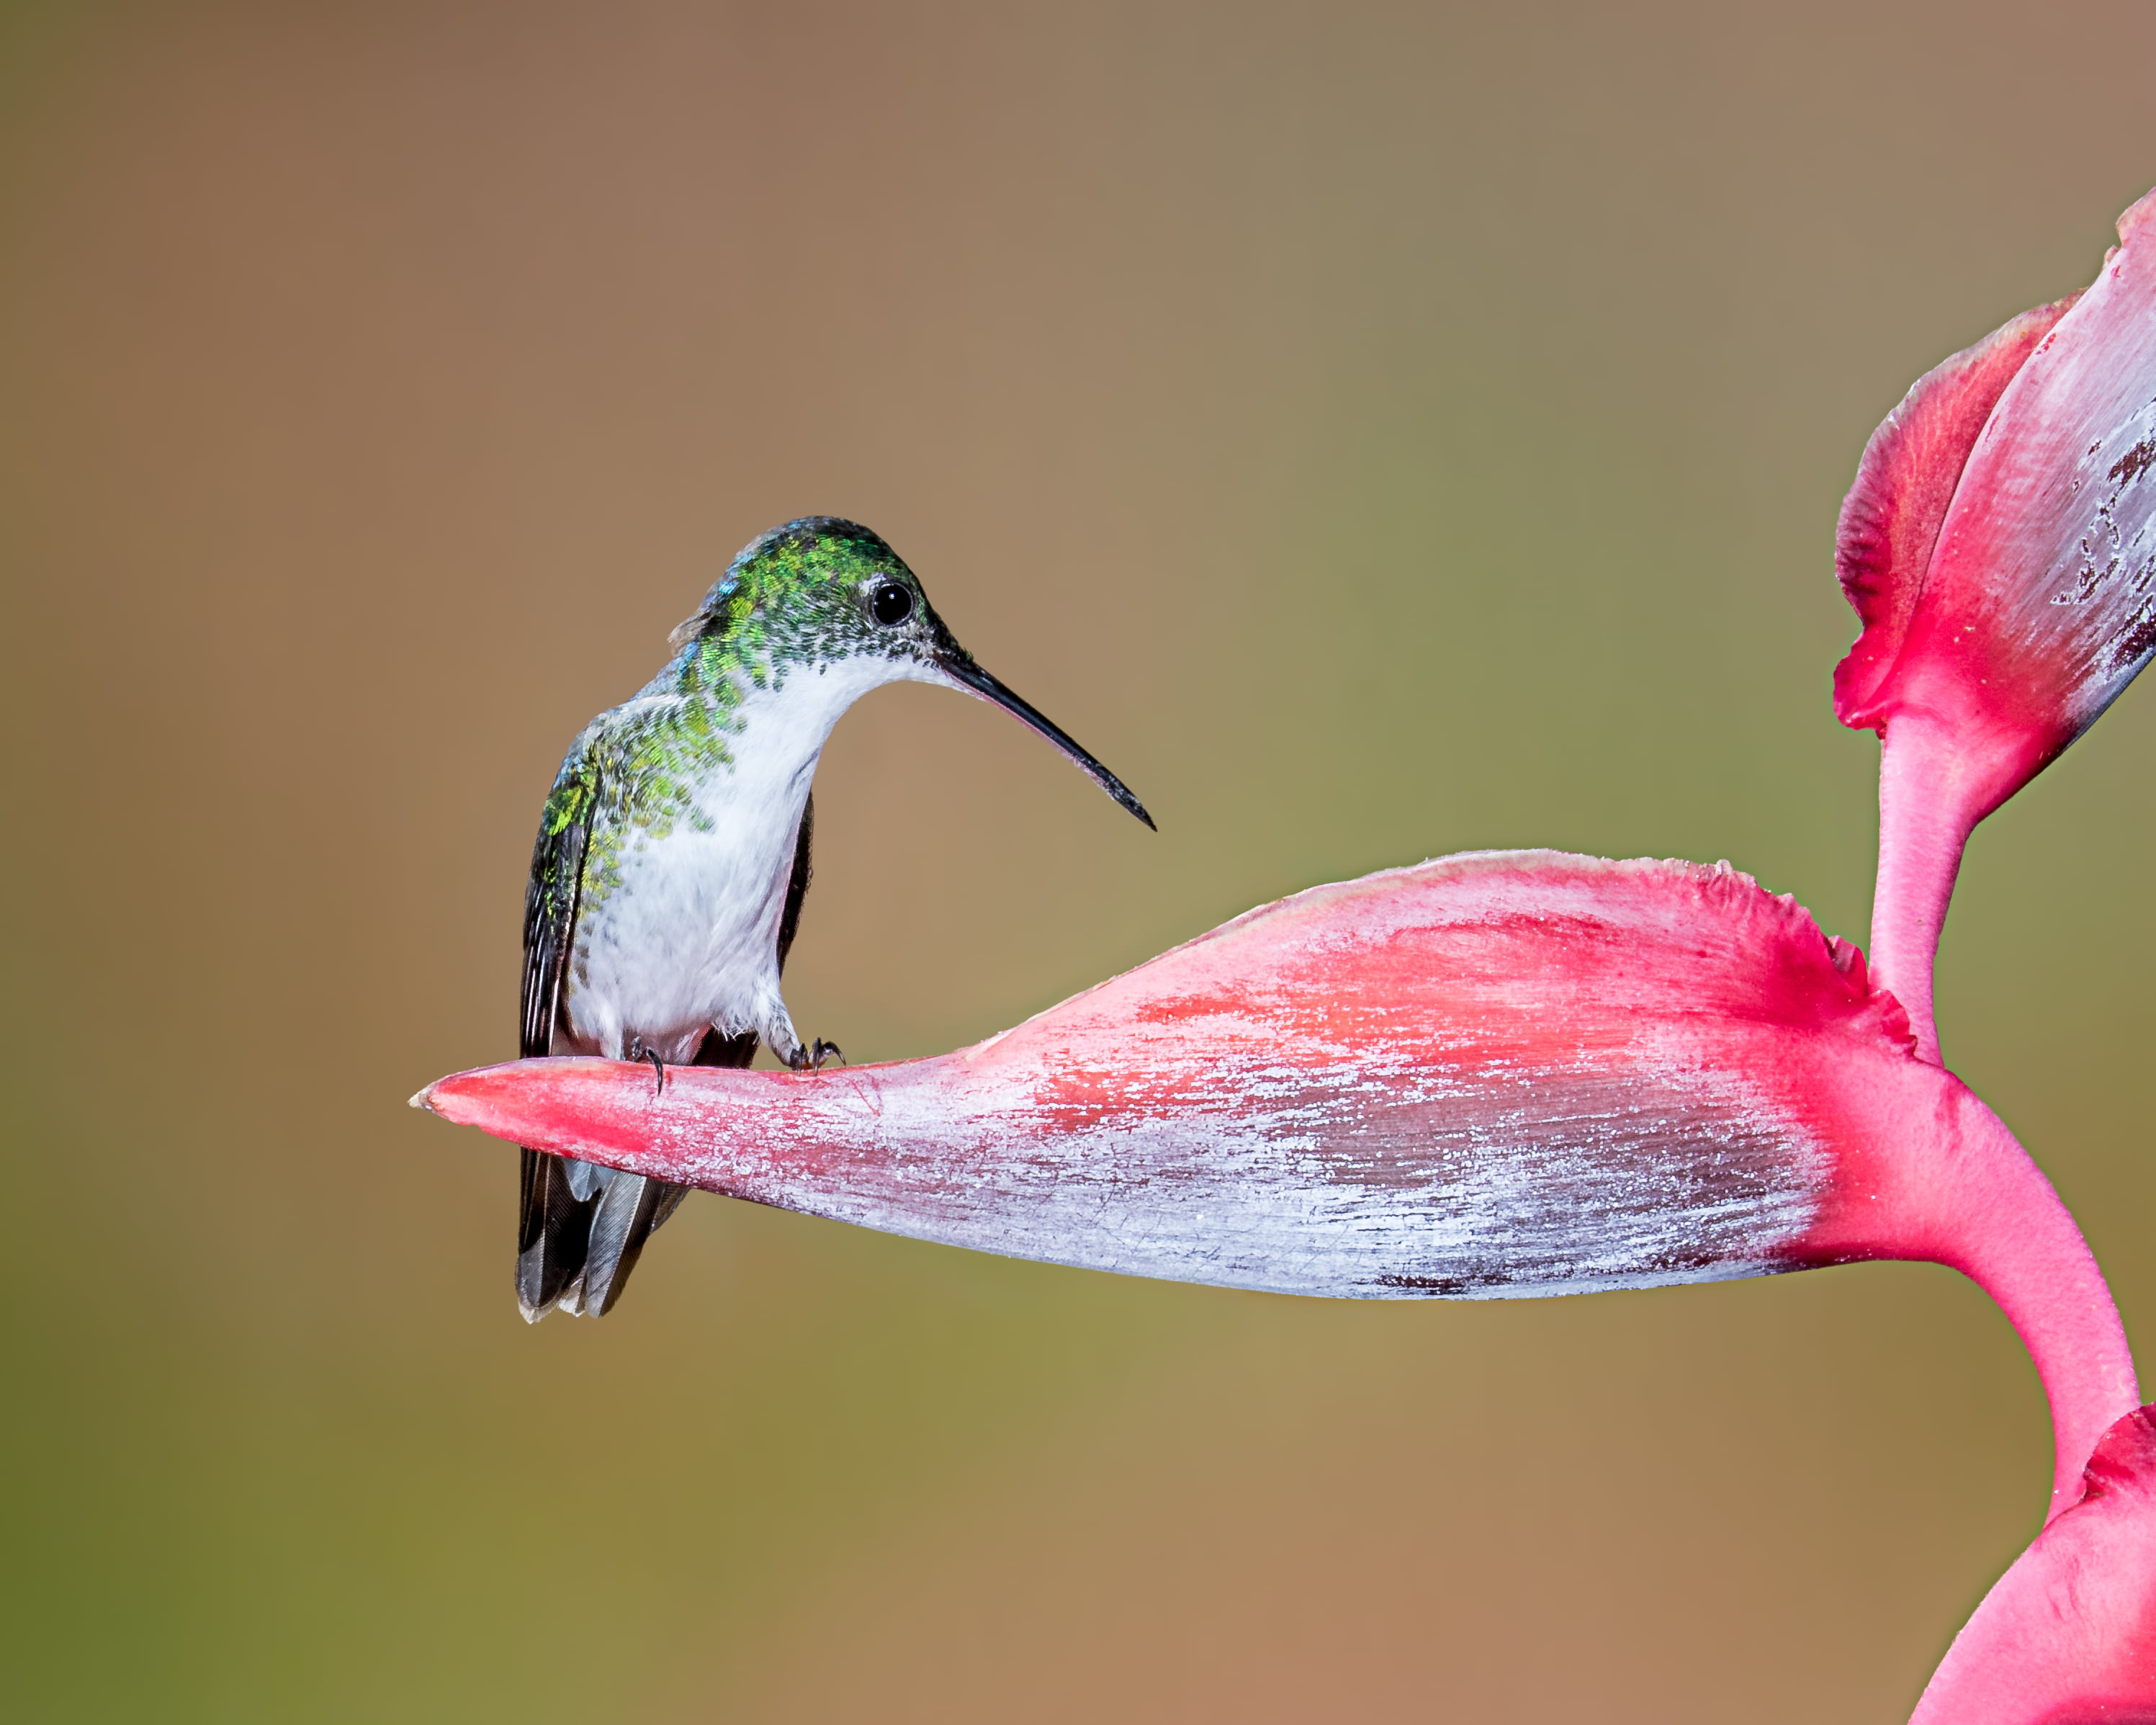 green and white long-beak bird on red flower, andean emerald, andean emerald